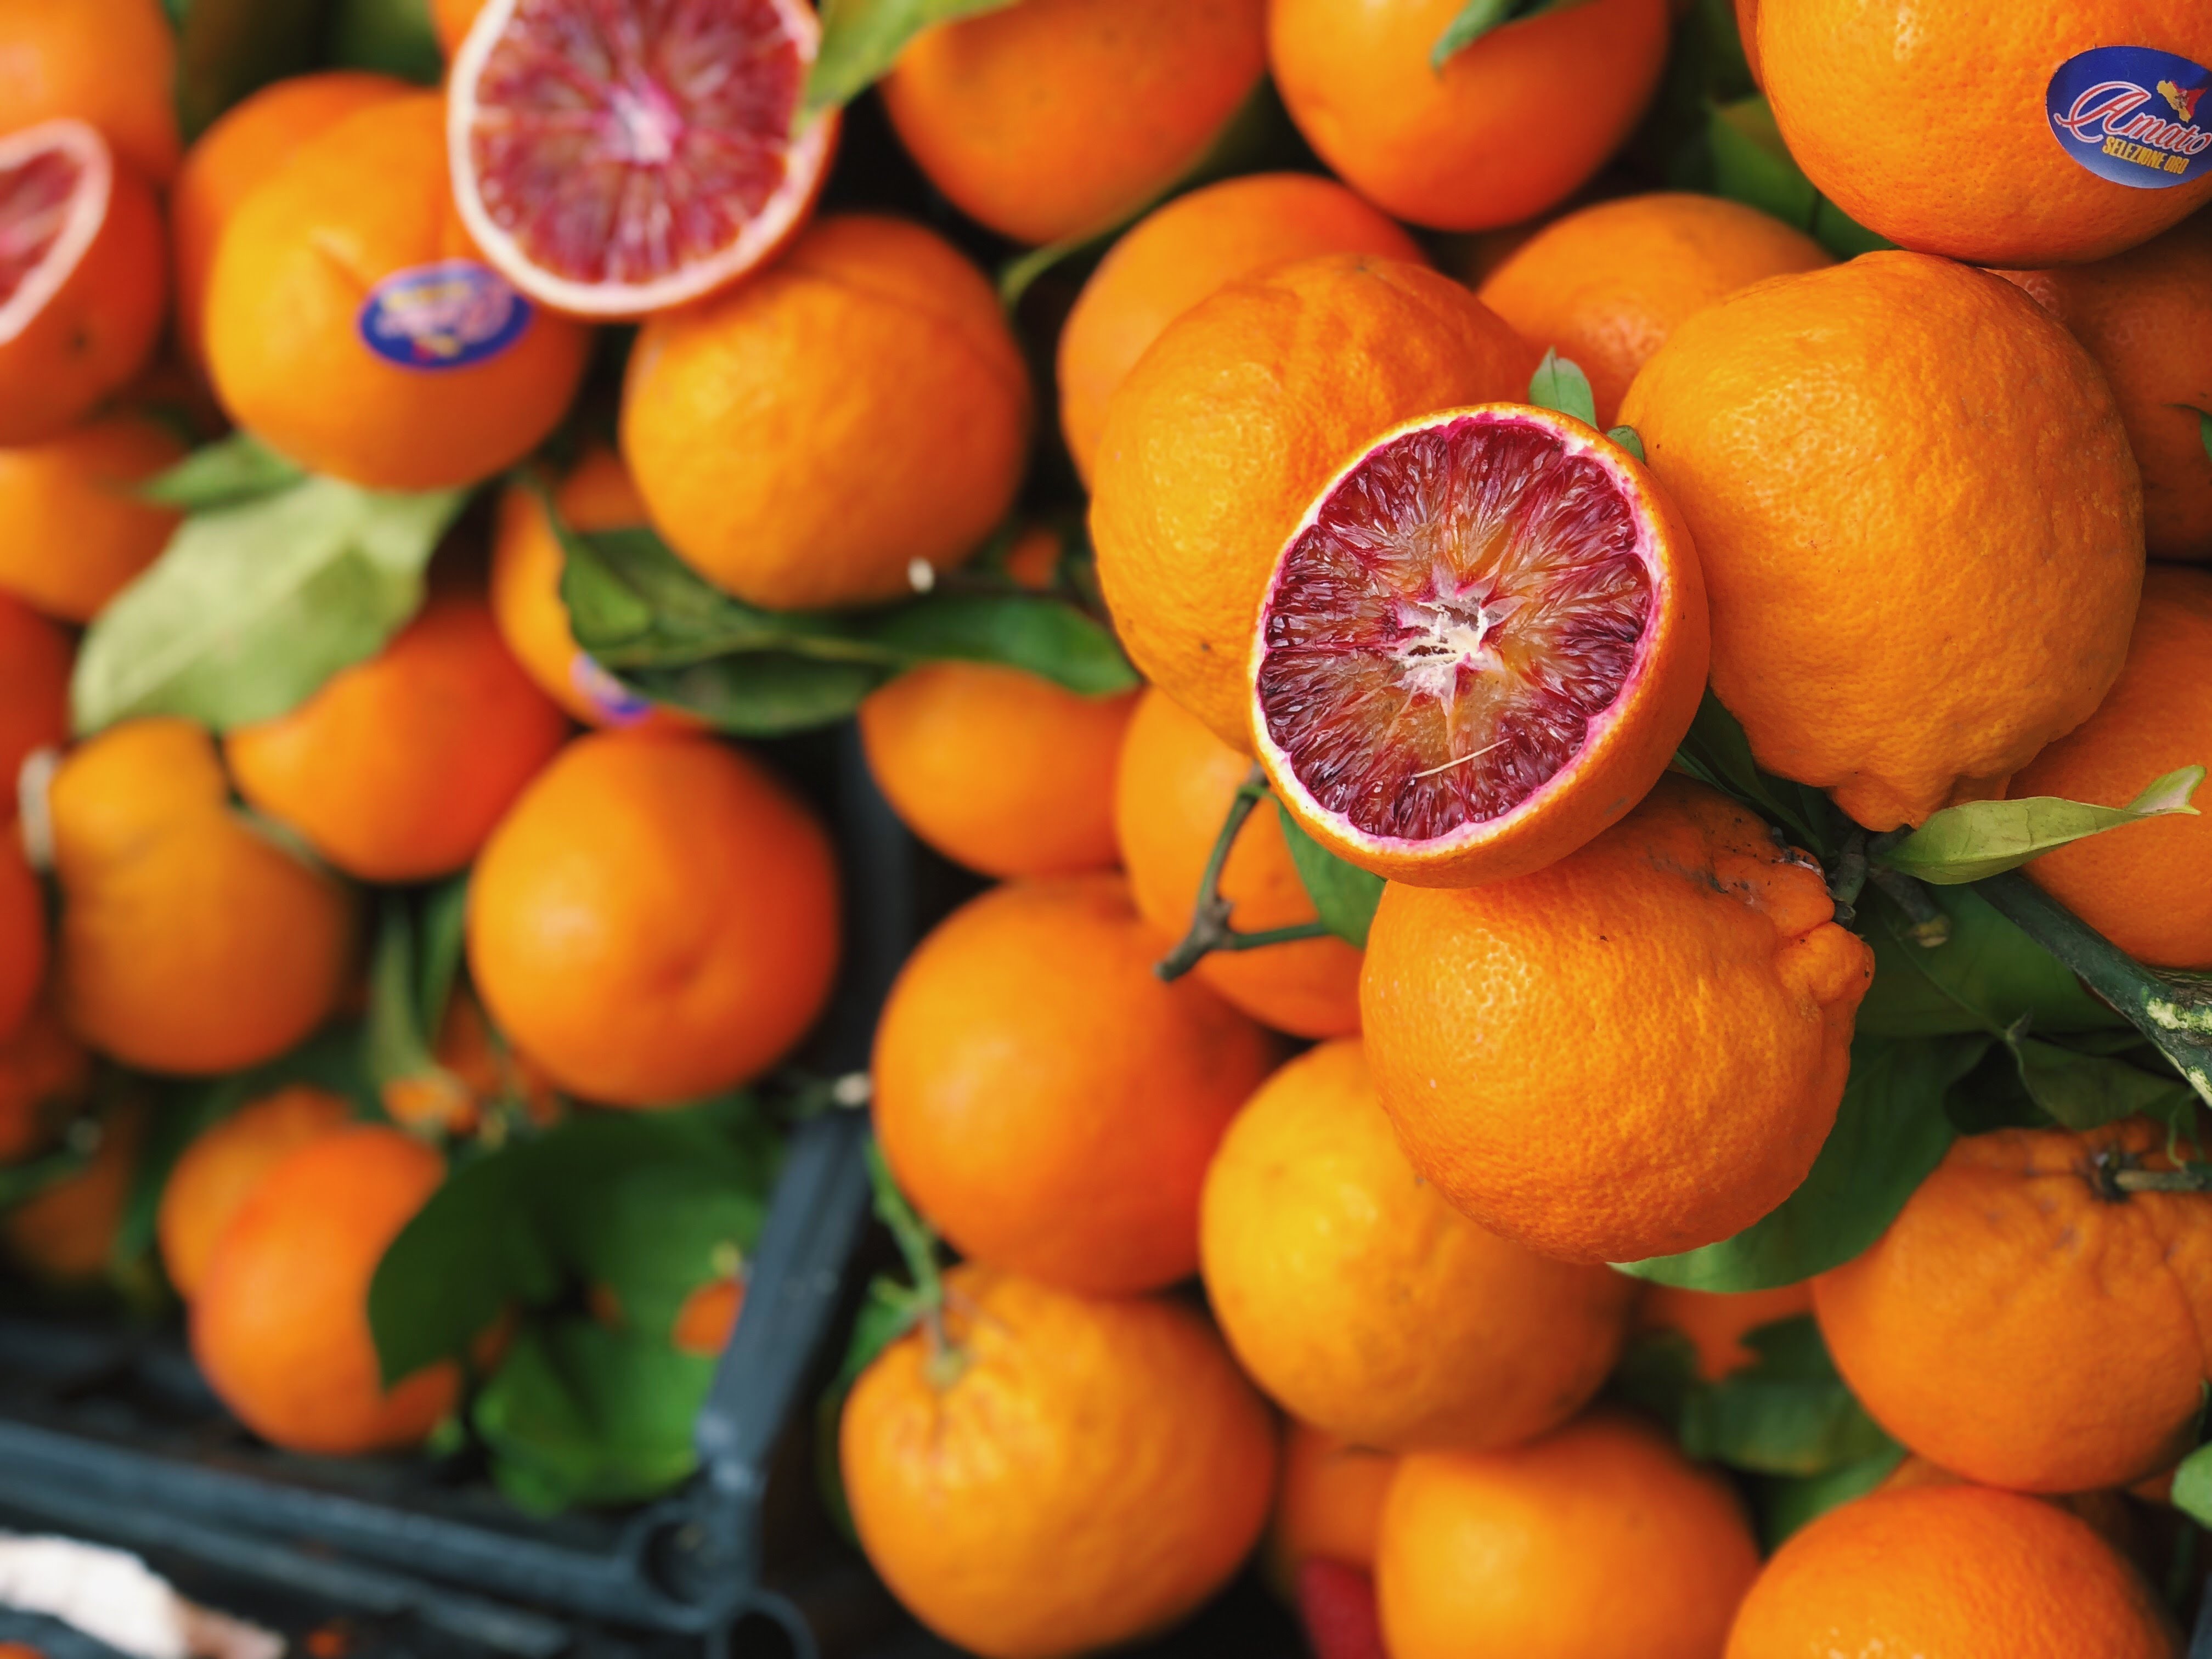 Blood Oranges from citrus marketing in Palermo Italy